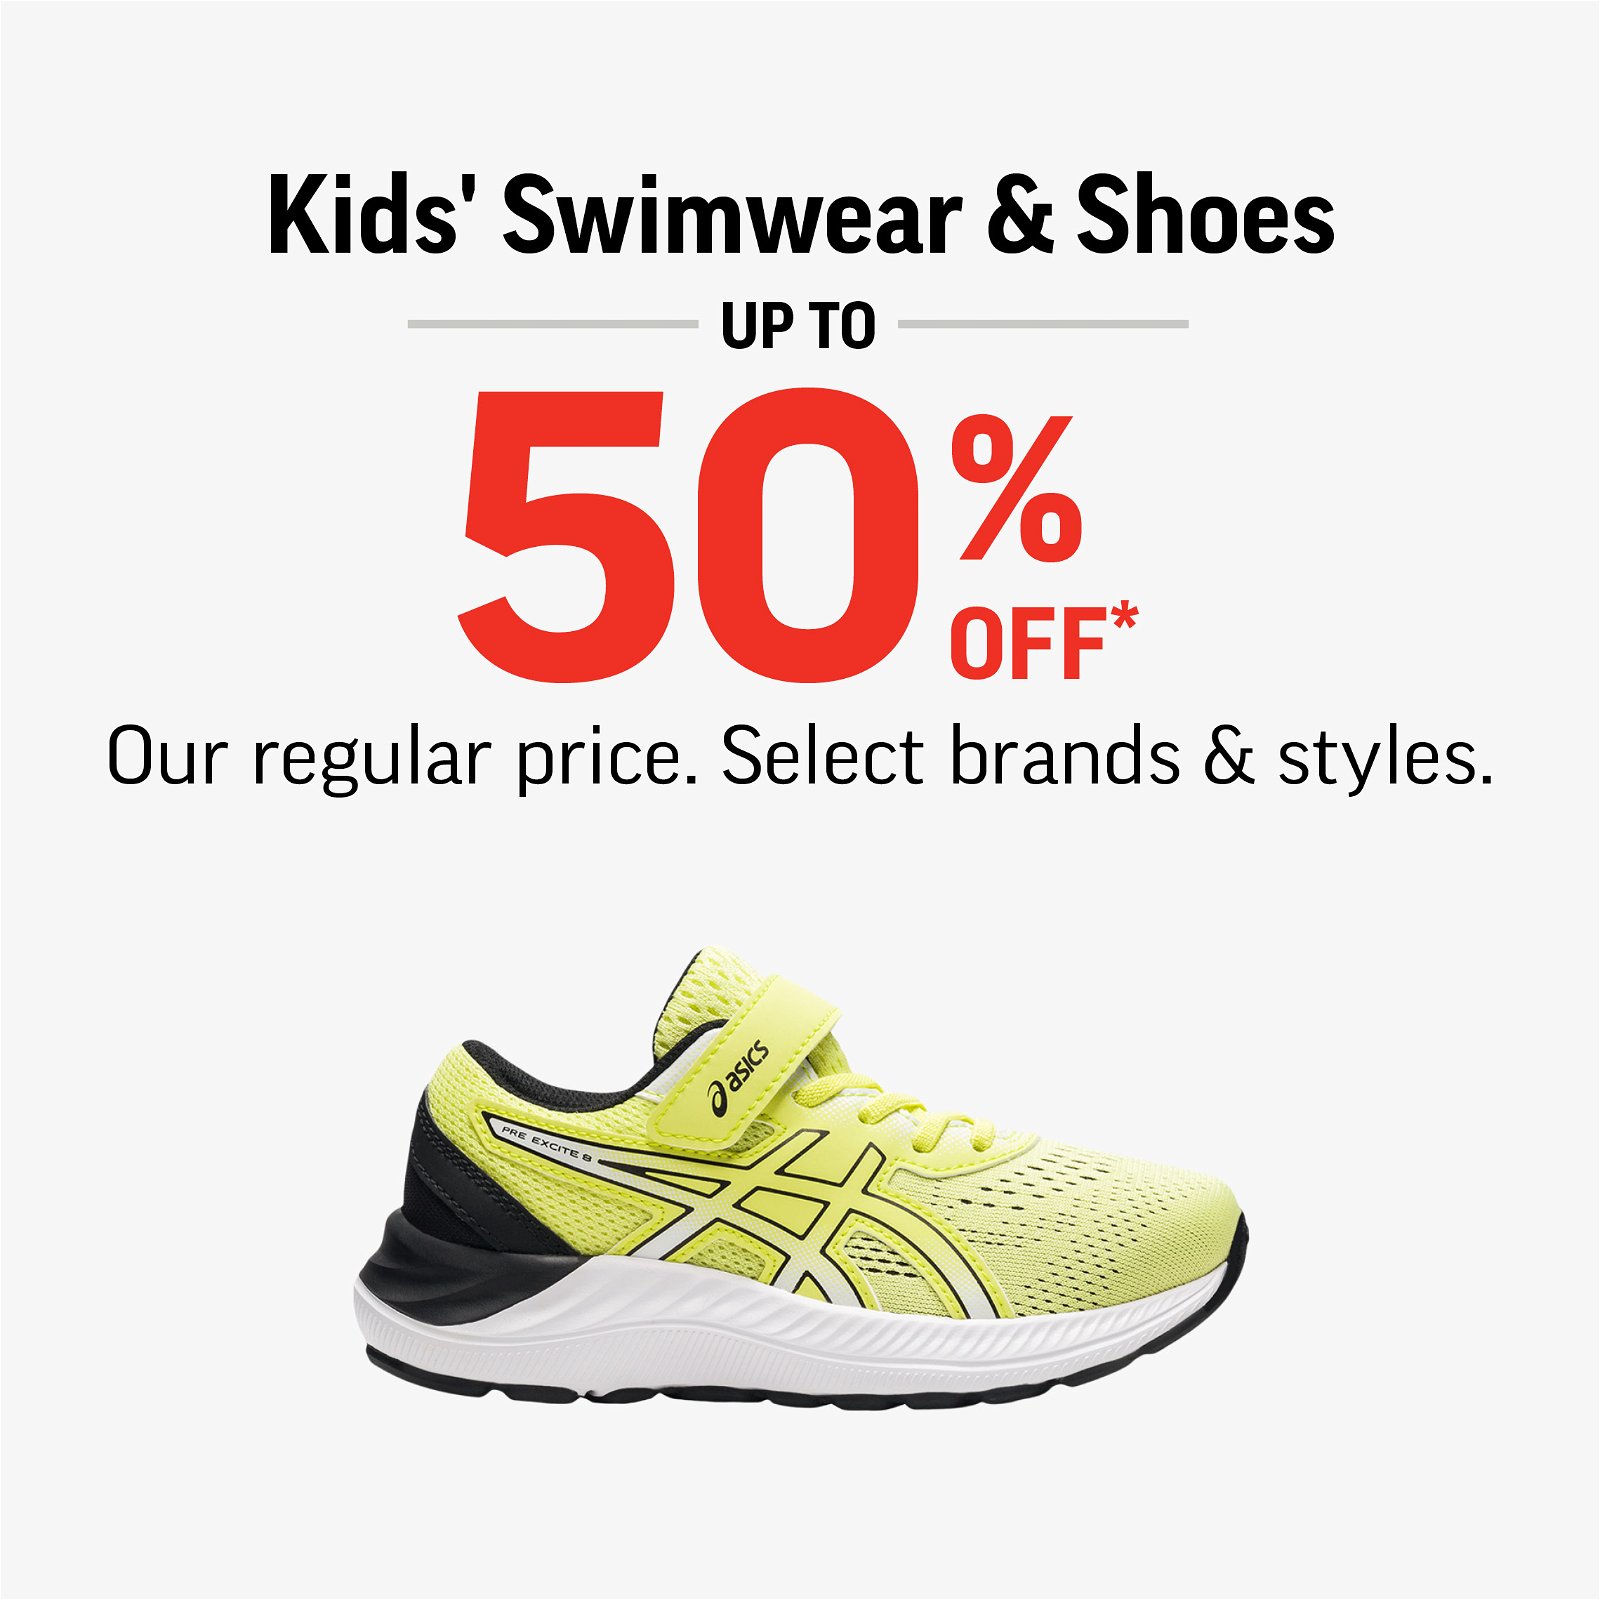 KIDS' SWIMWEAR & SHOES UP TO 50% OFF 